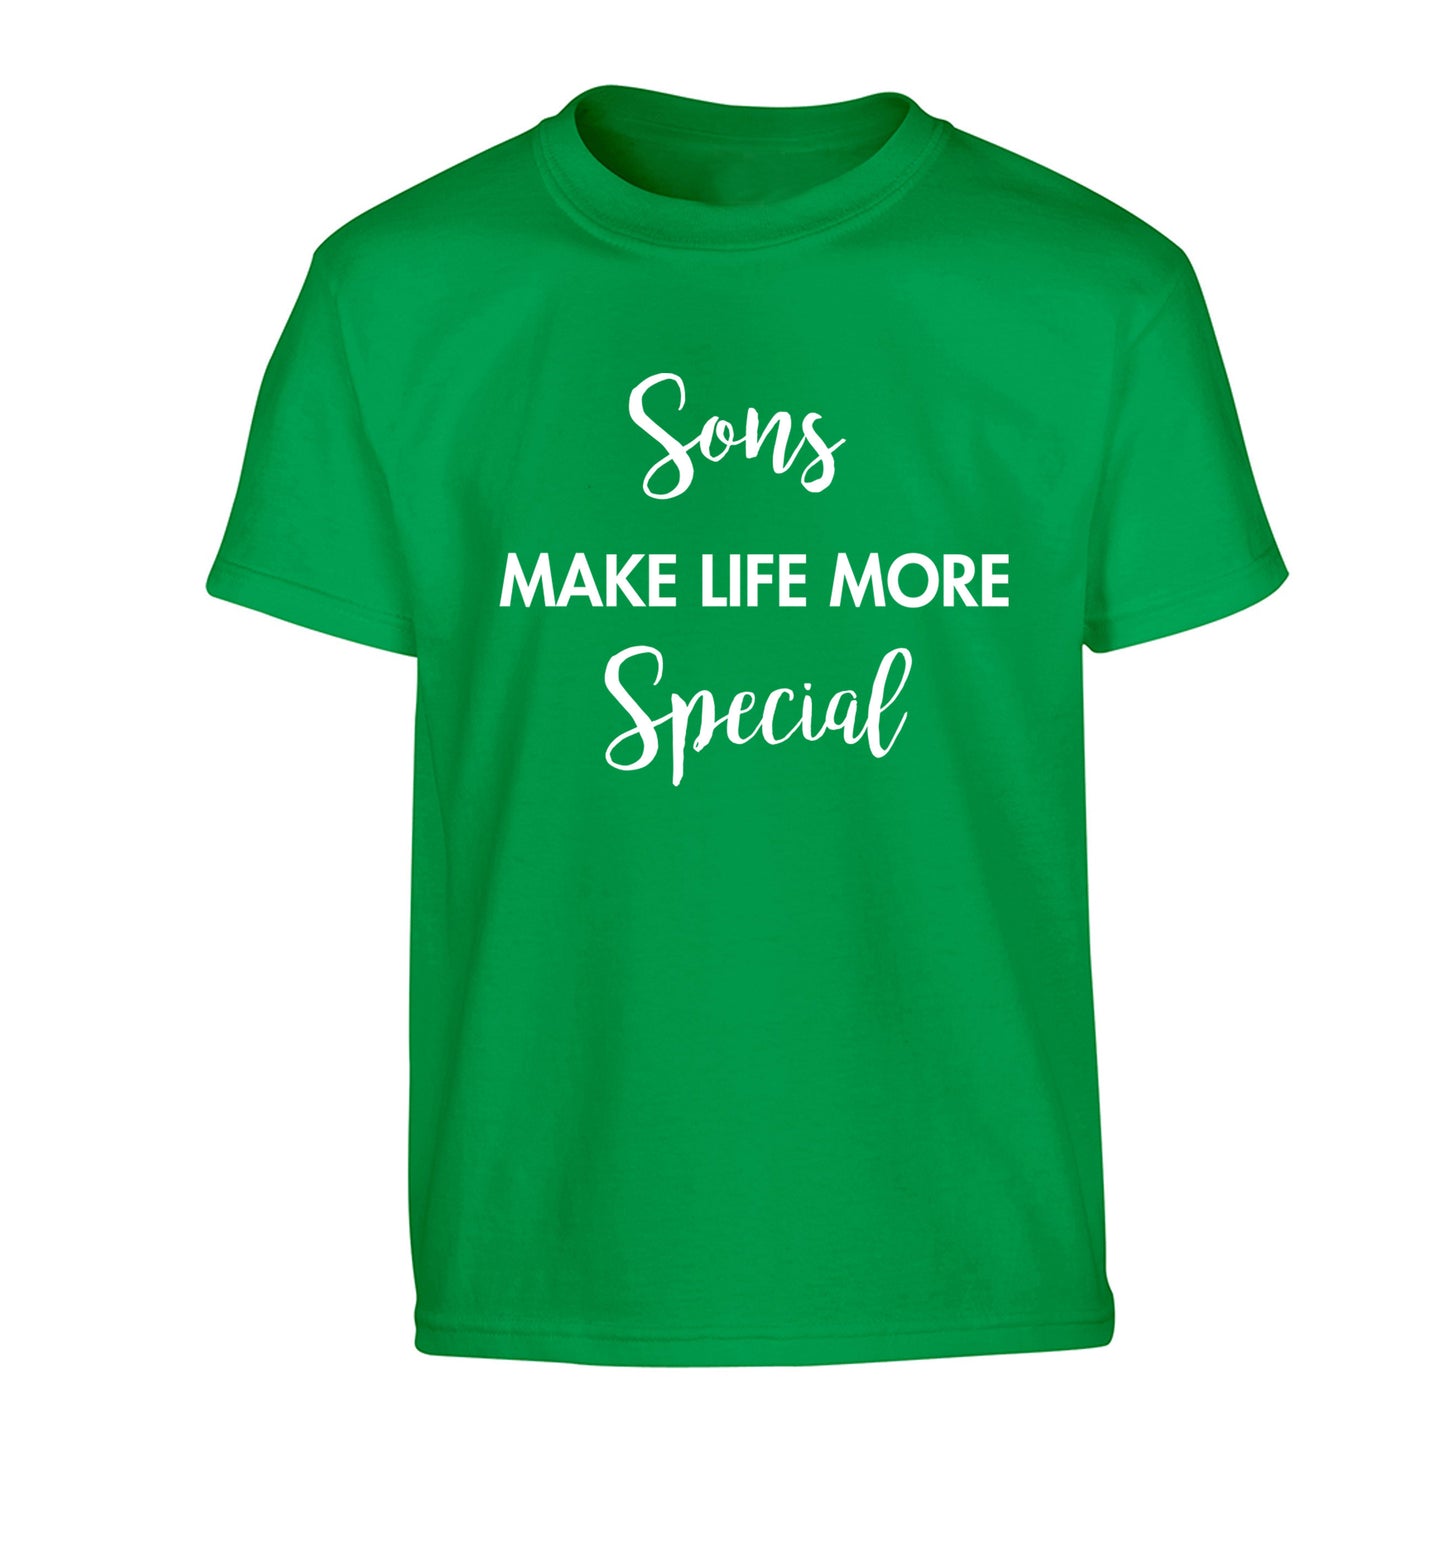 Sons make life more special Children's green Tshirt 12-14 Years